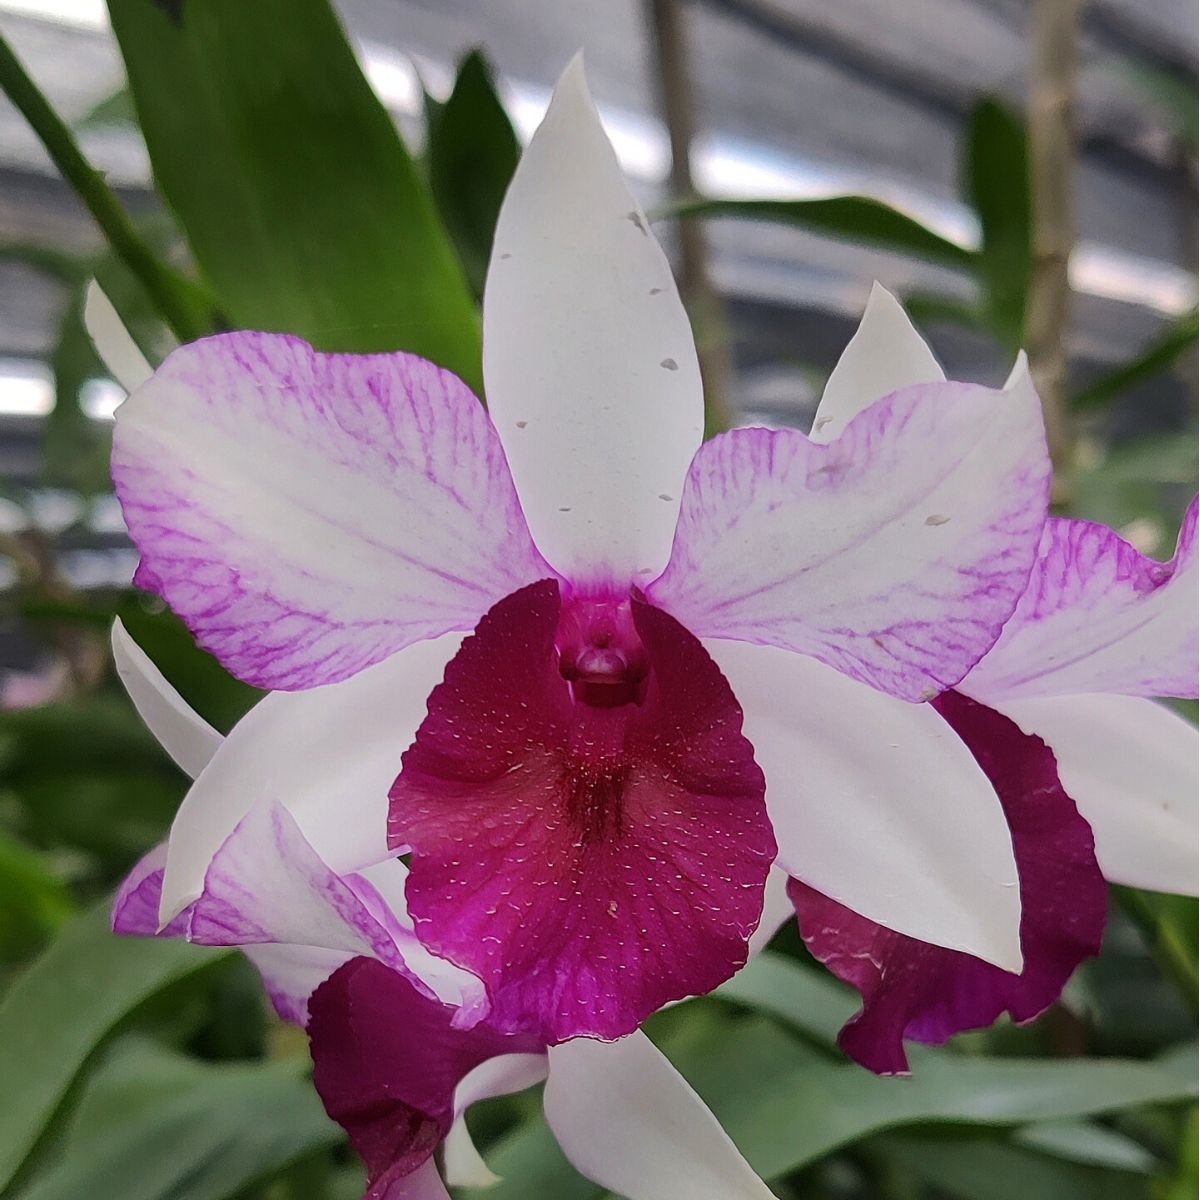 Dendrobium Freida Bratananta BS orchid - Exquisite blooms showcasing stunning beauty and fragrance